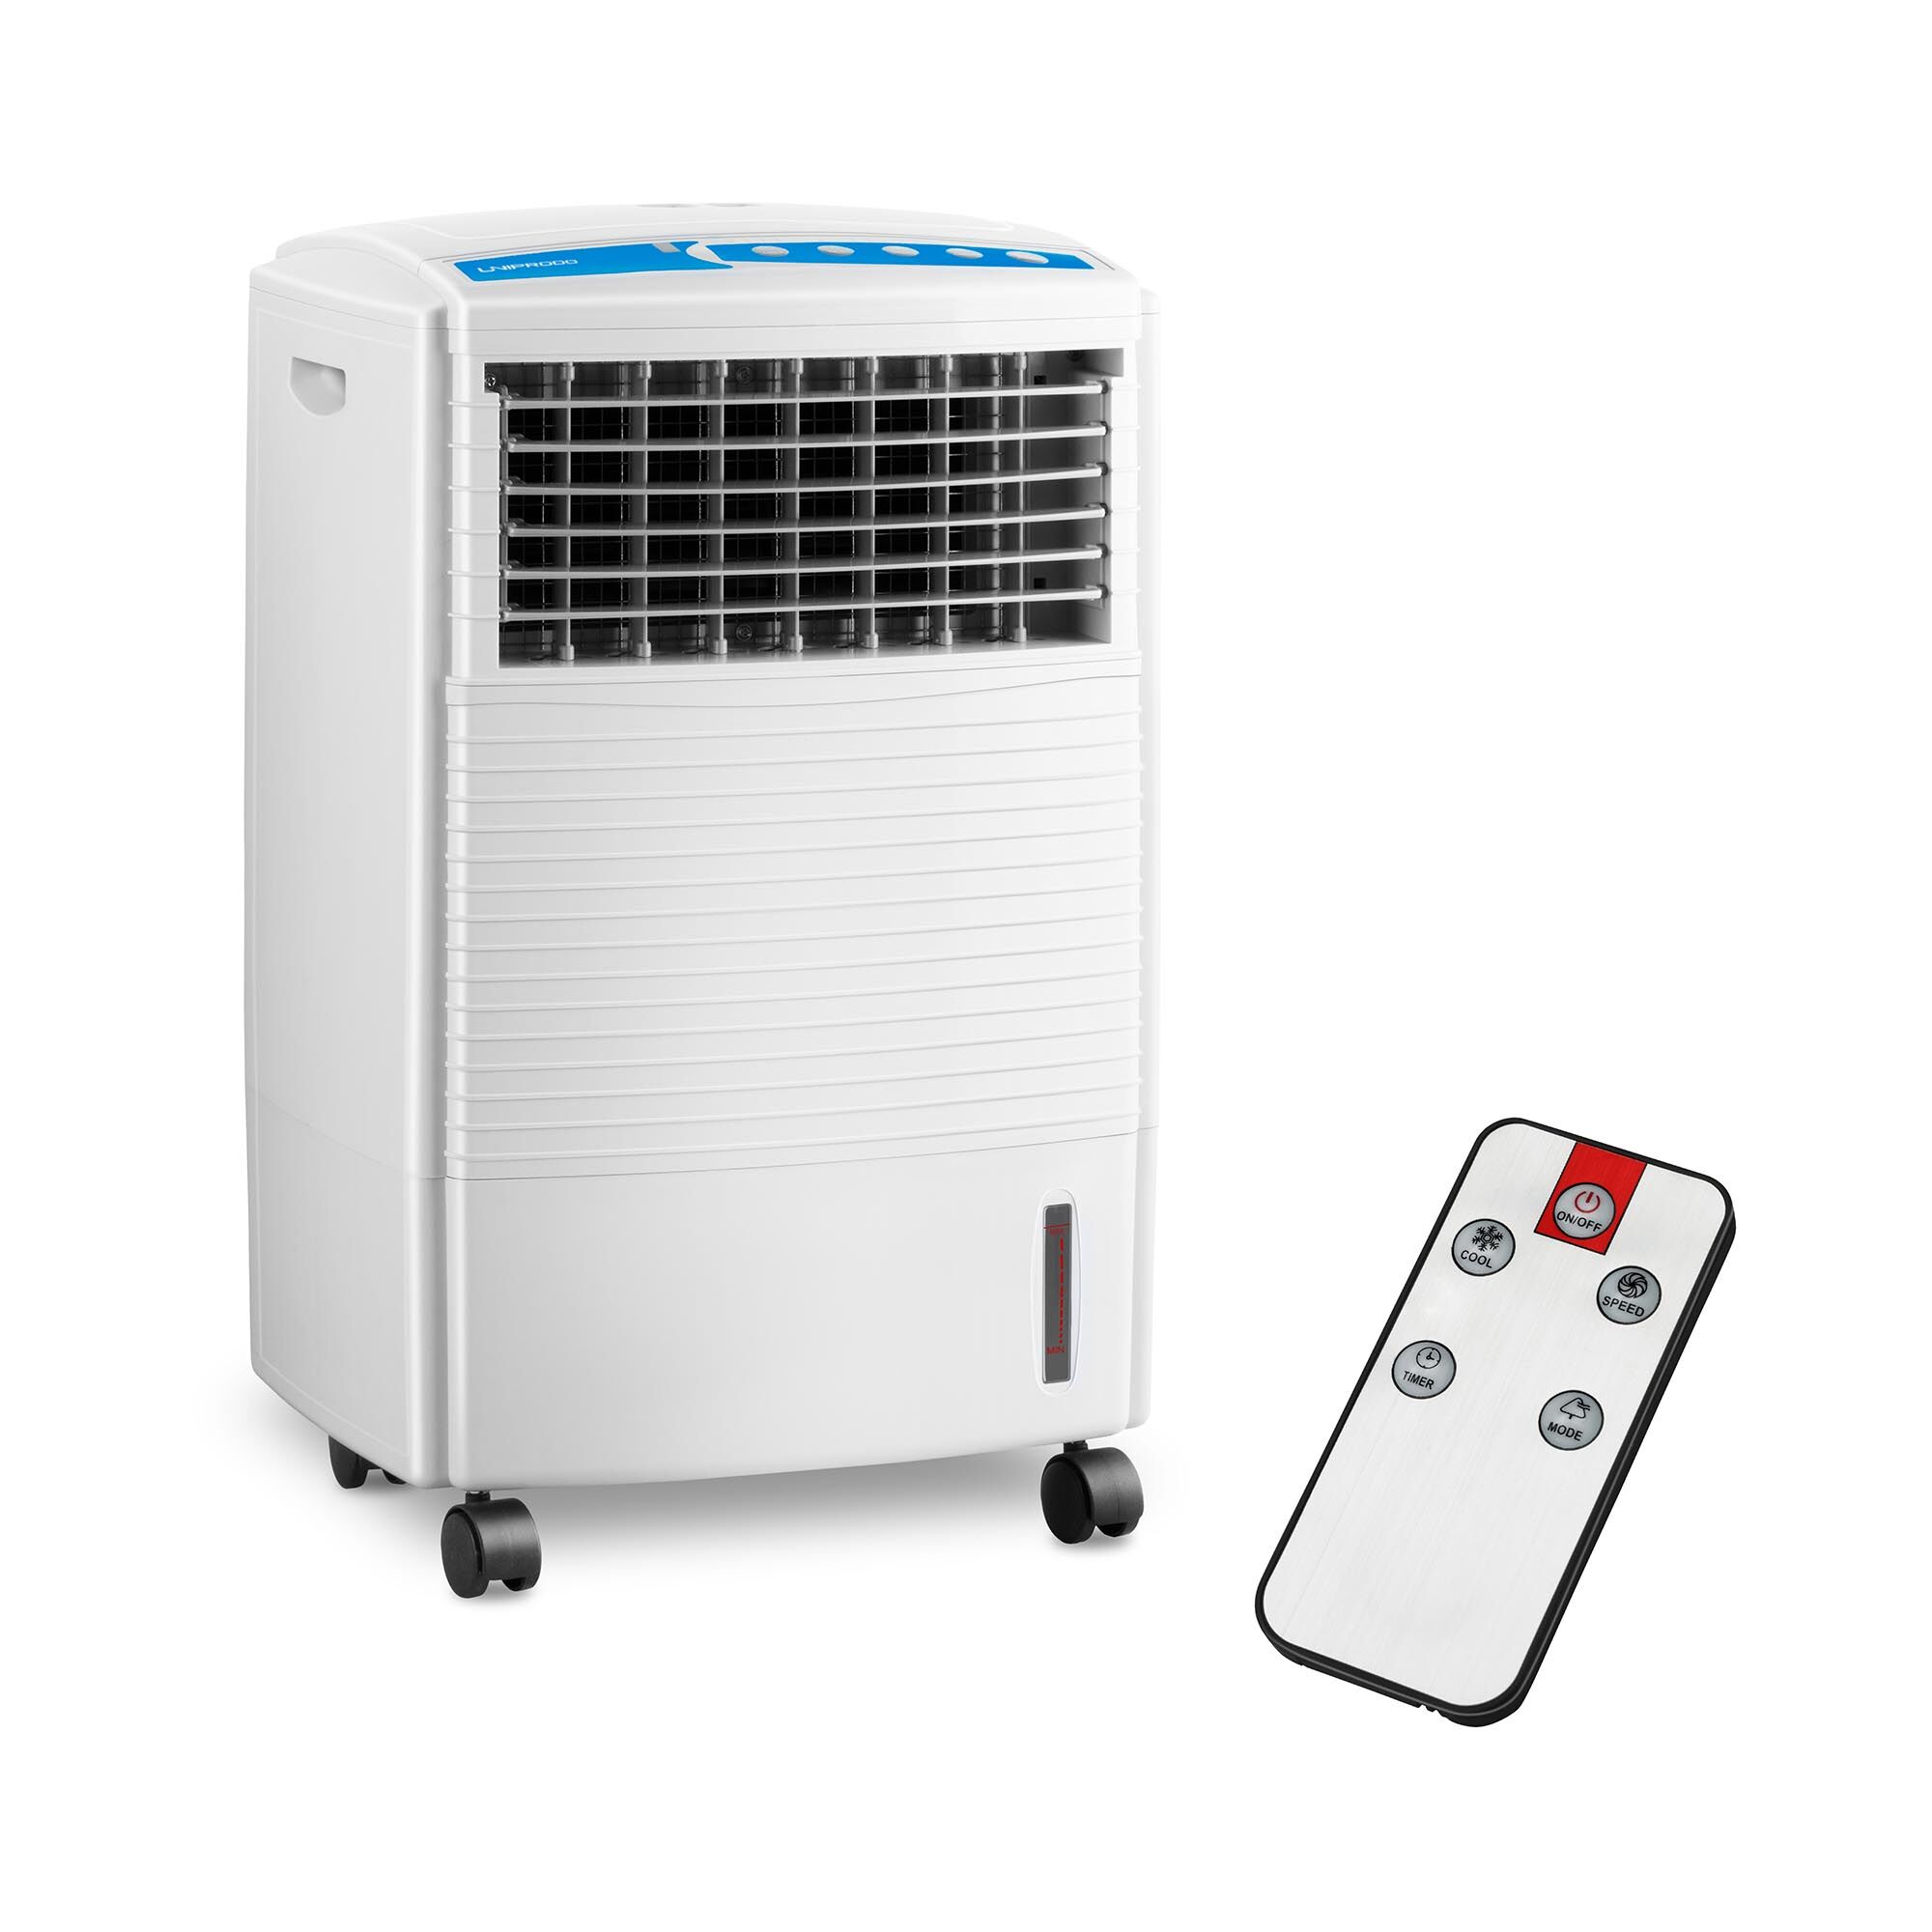 Uniprodo Water Air Cooler - 3 in 1 - 10 L Water Tank UNI_COOLER_04